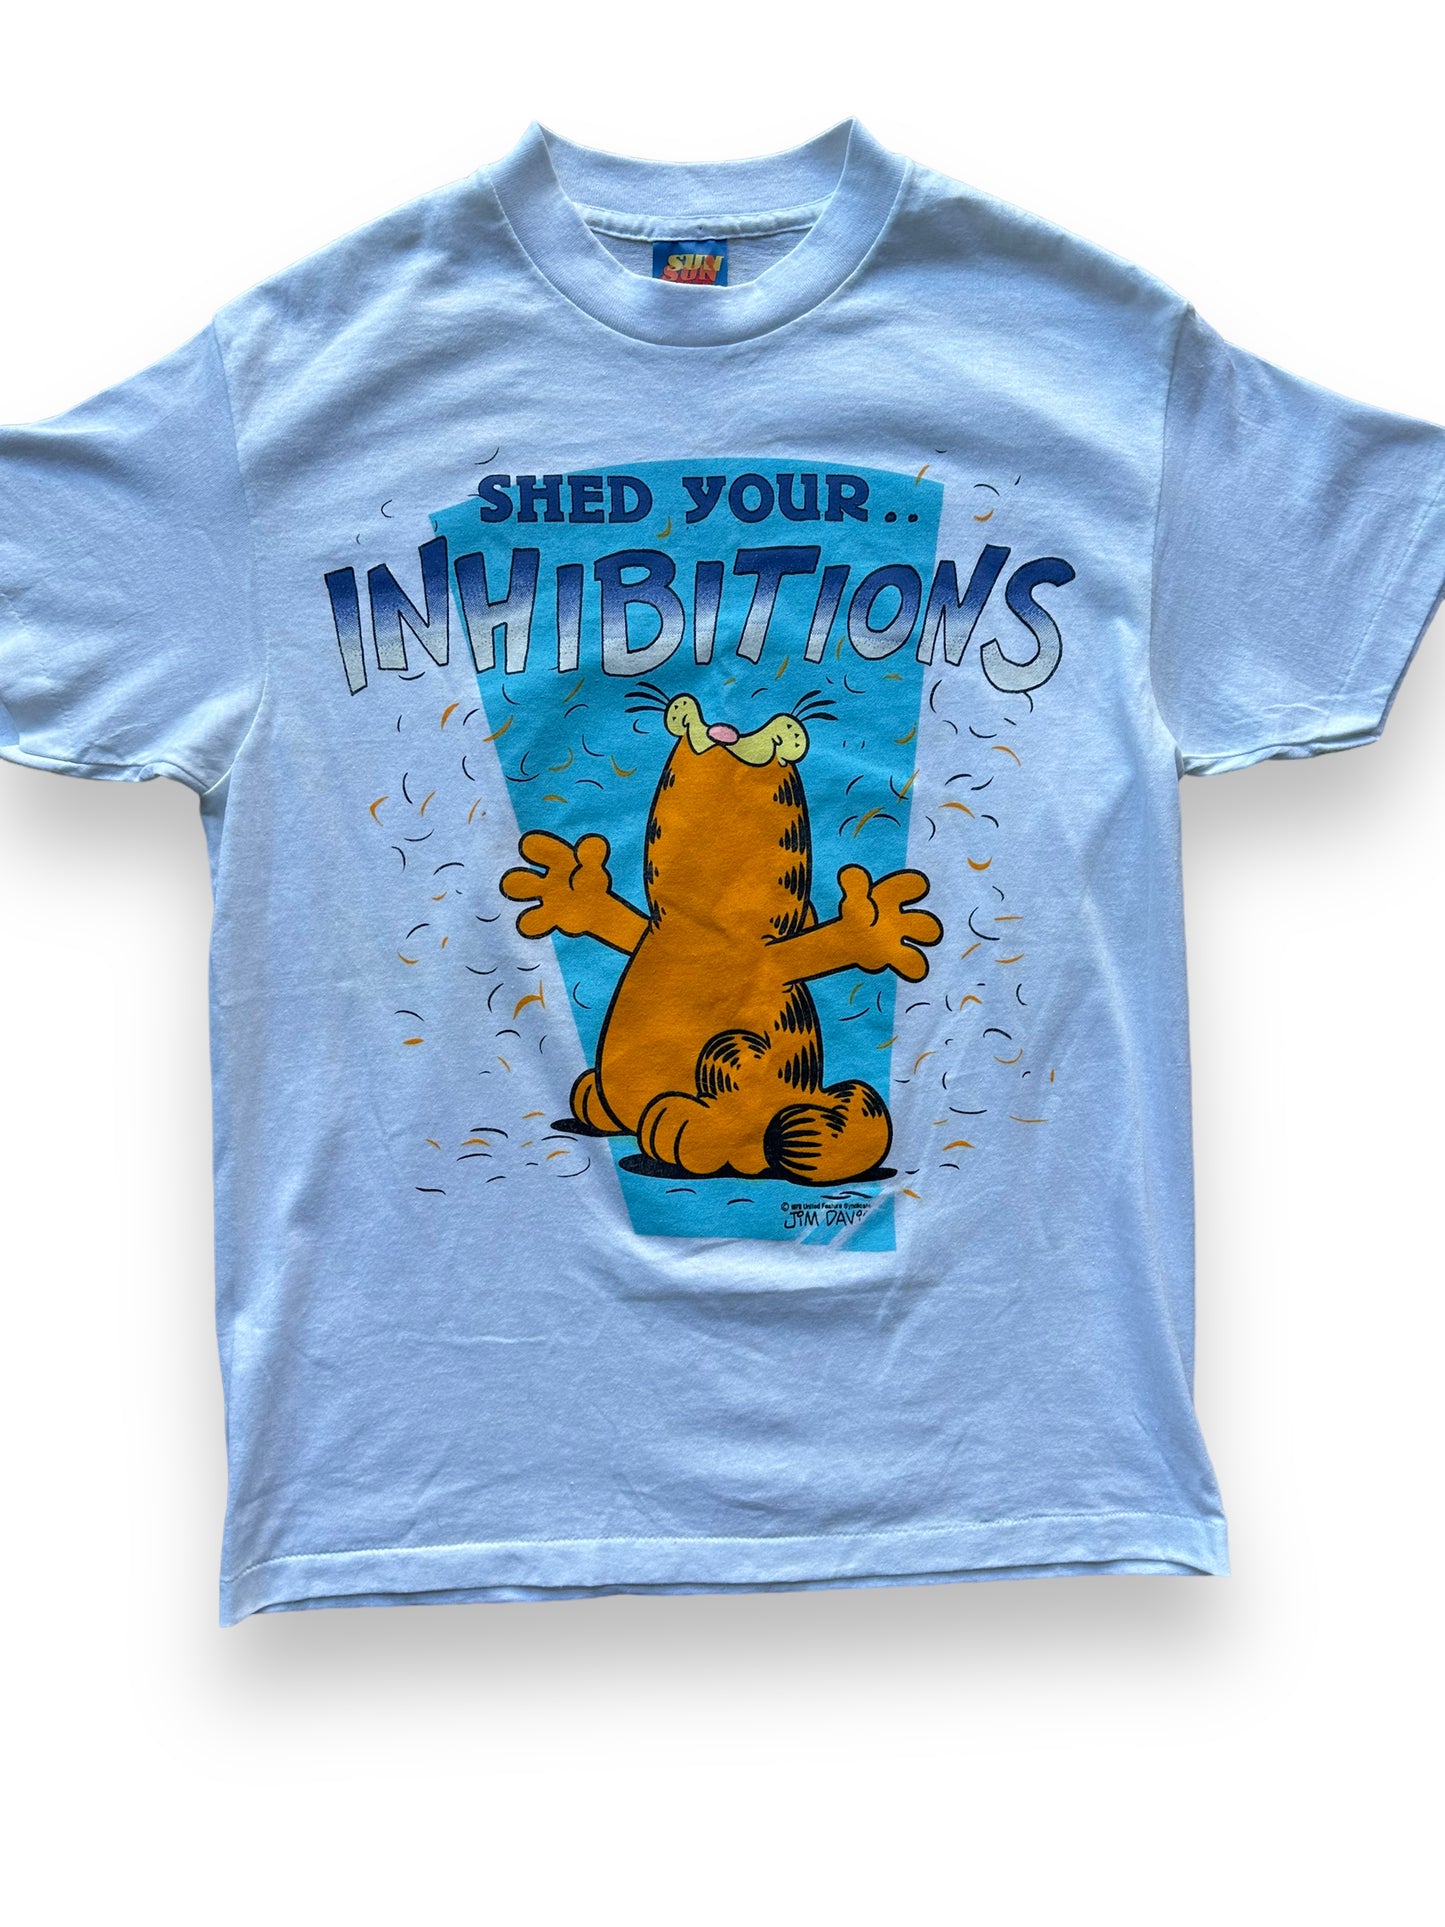 Front close up of Vintage Garfield "Shed Your Inhibitions" Tee SZ M |  Vintage Cat Tee Seattle | Barn Owl Vintage